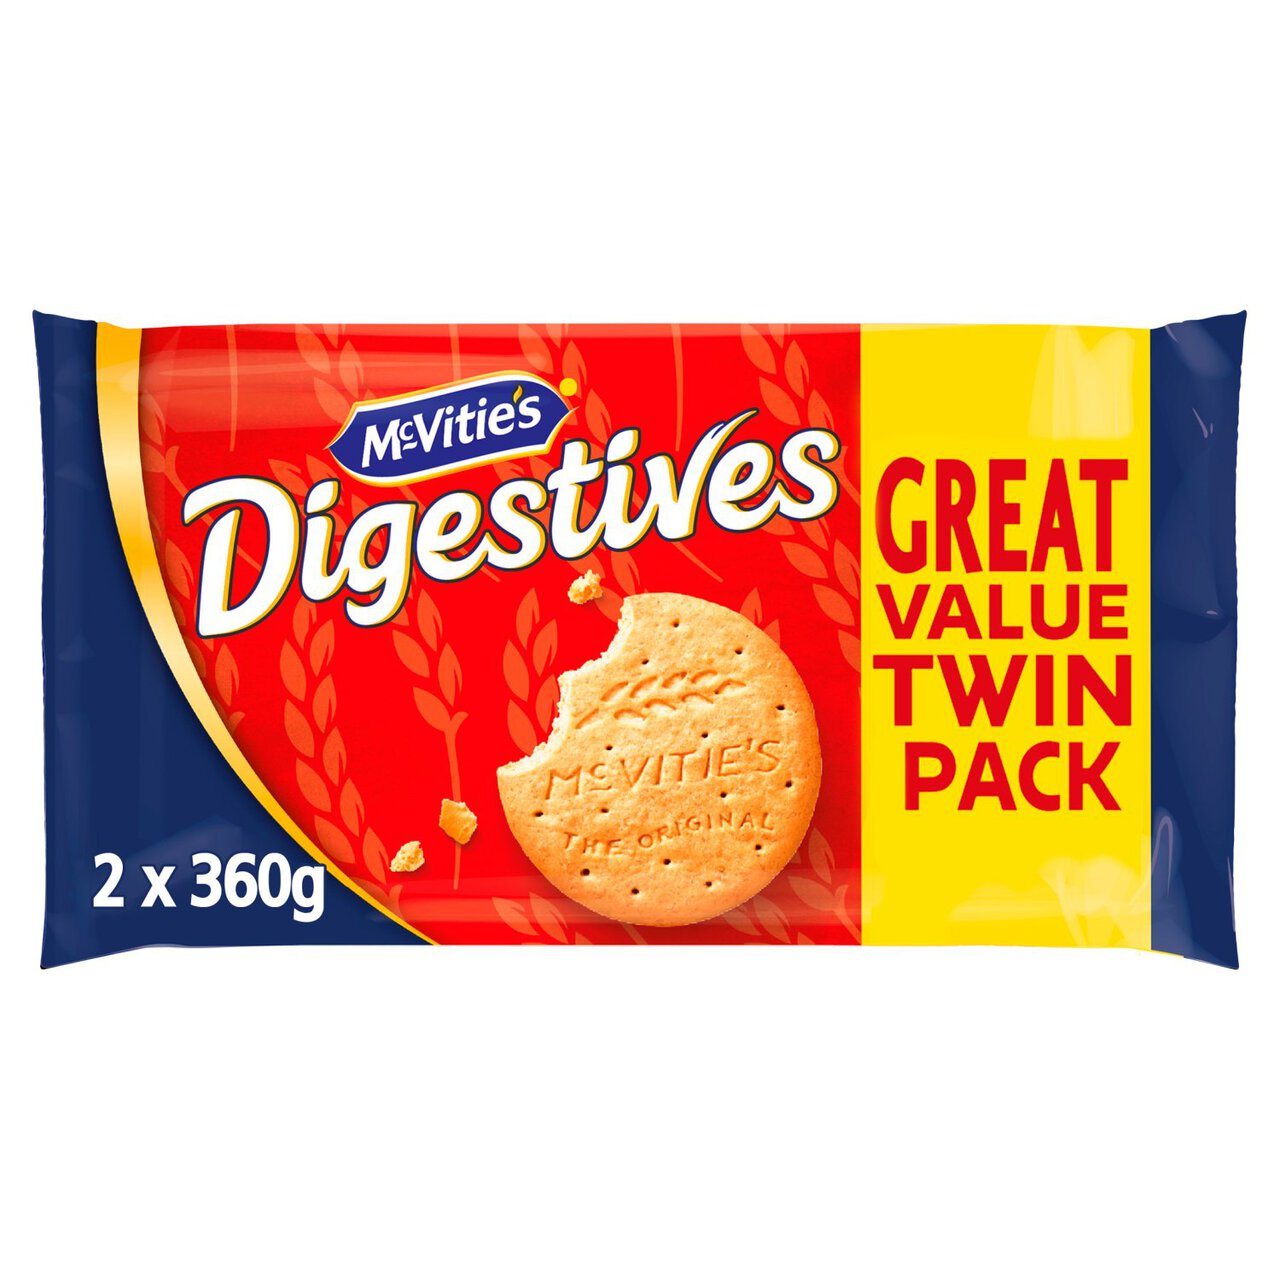 McVitie's Digestives The Original Biscuits Twin Pack 2 x 360g